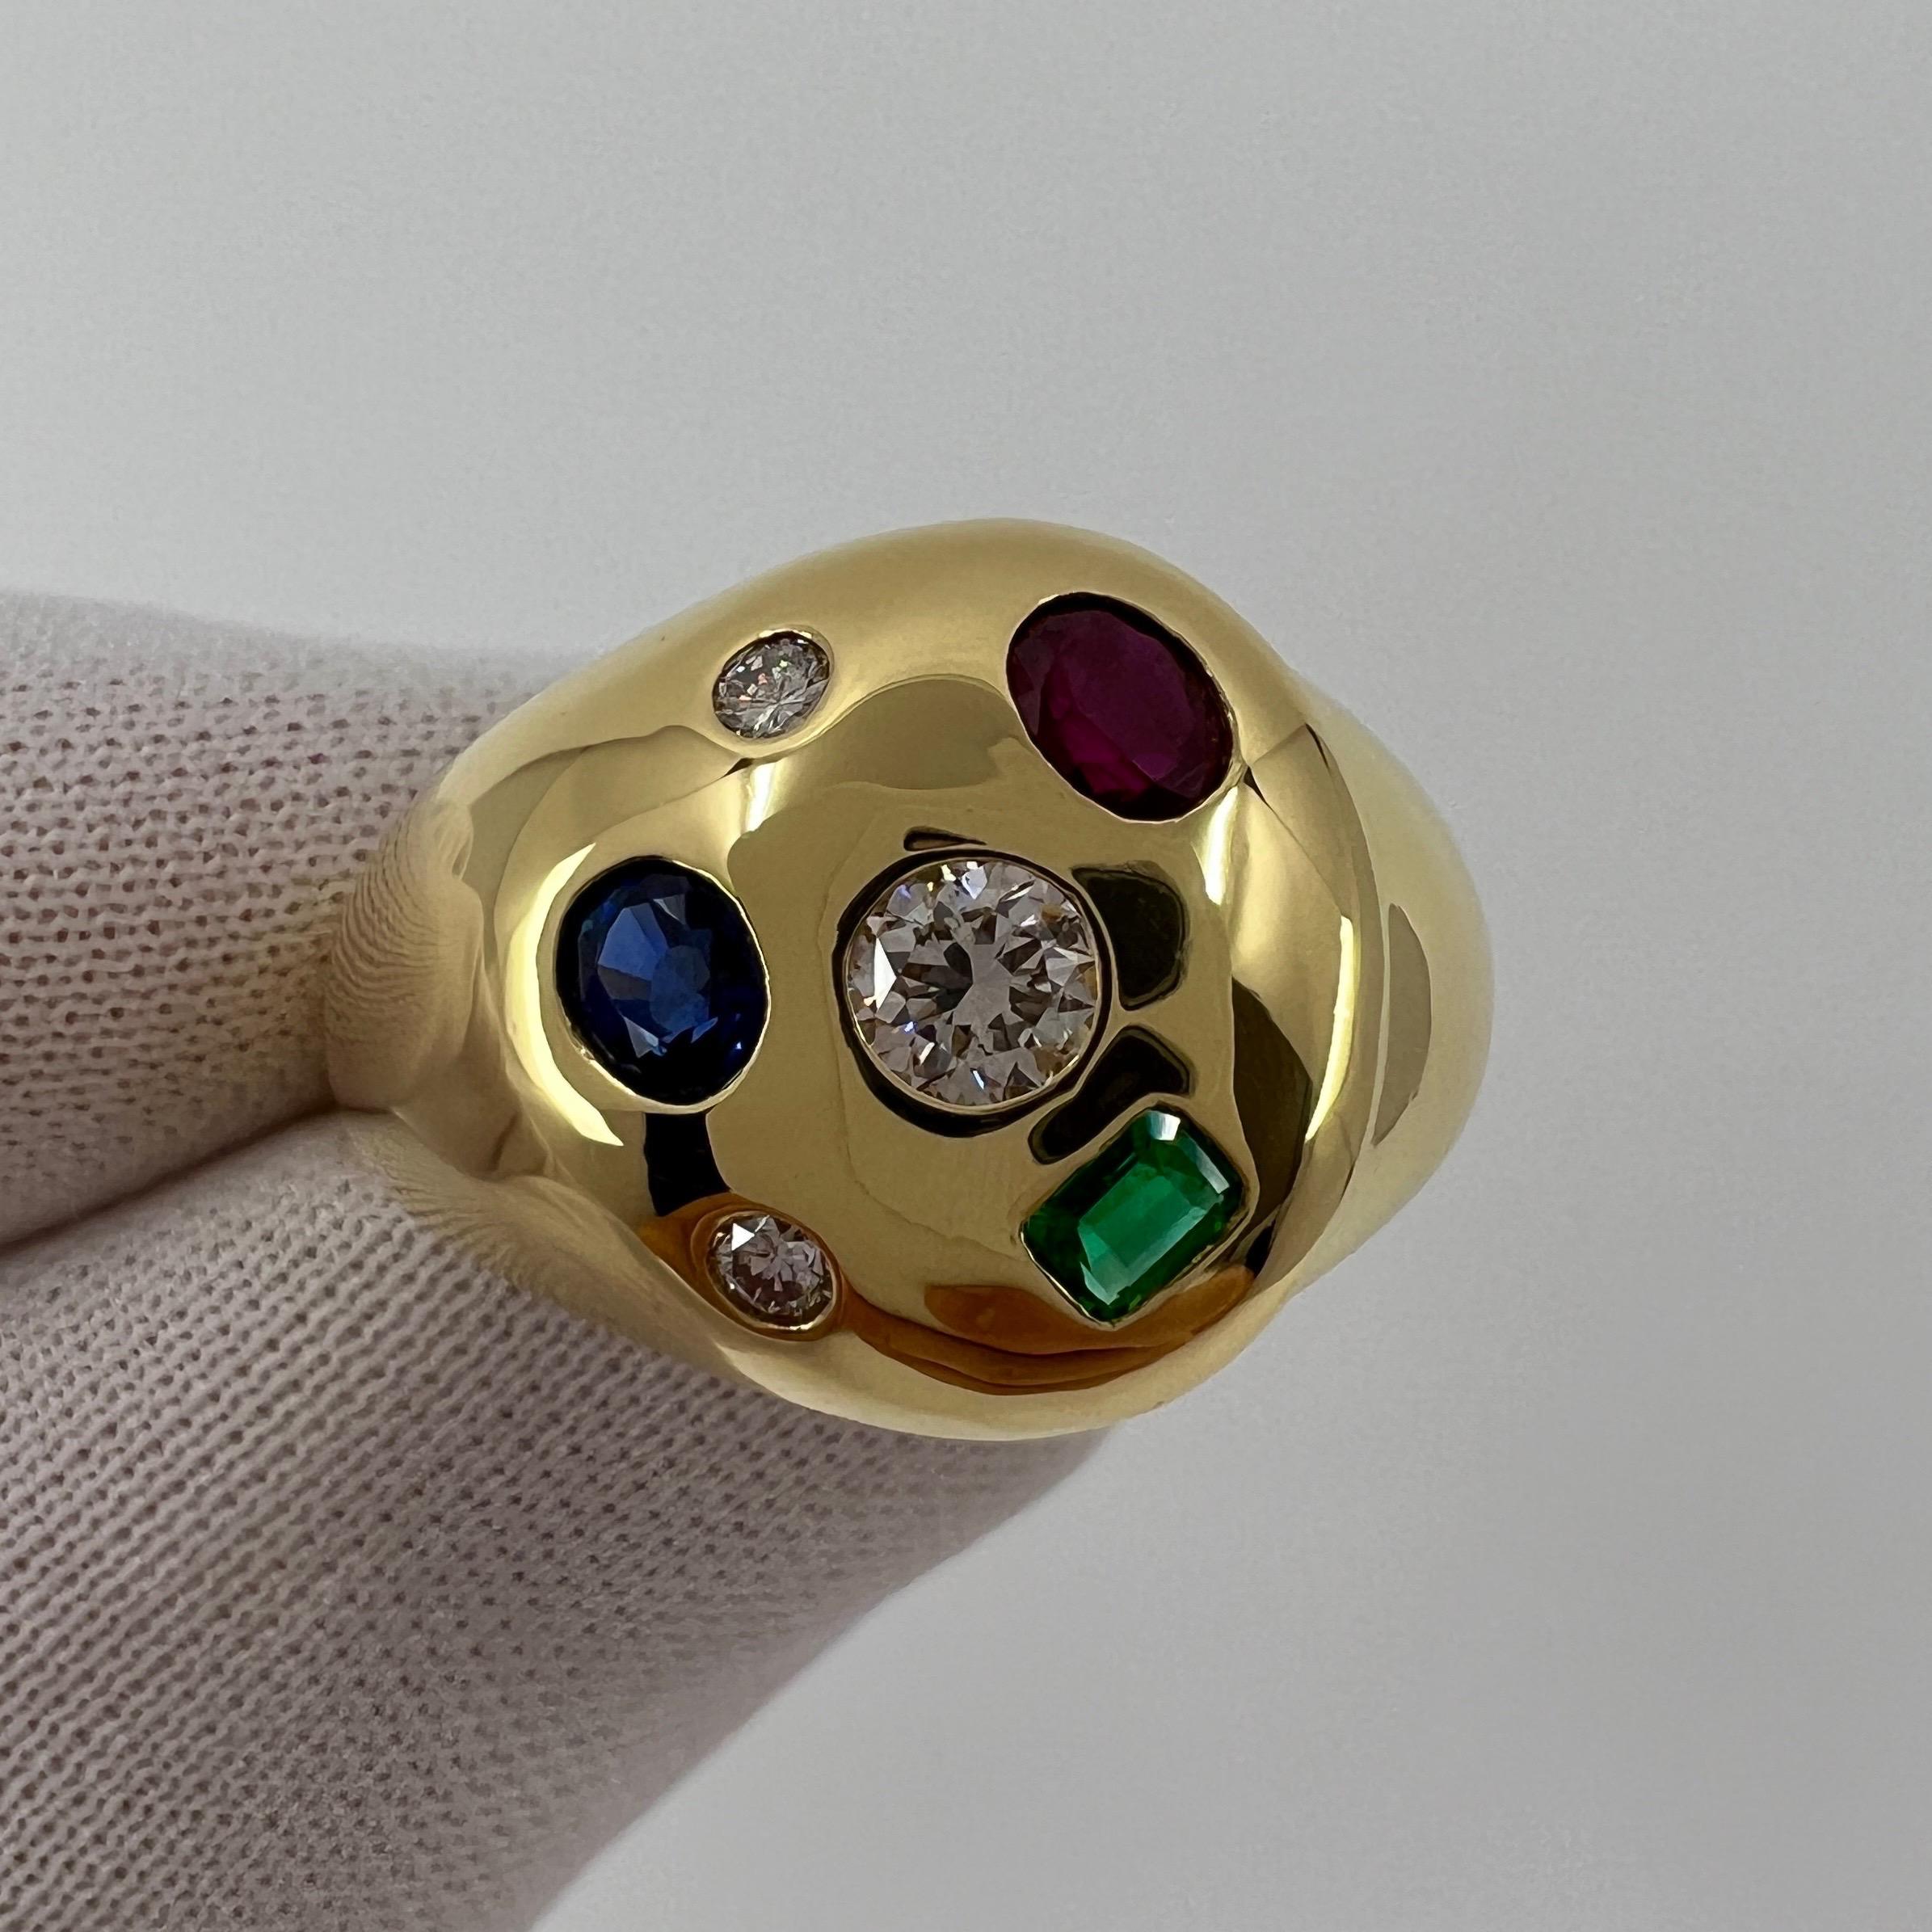 Natural Ruby ,Sapphire, Emerald And Diamond 18k Yellow Gold Tutti Frutti Dome Signet Ring.

A beautifully made ring set with an array of different cut natural gemstones exquisitely flush set into the domed top.

This piece features a 0.22ct oval cut